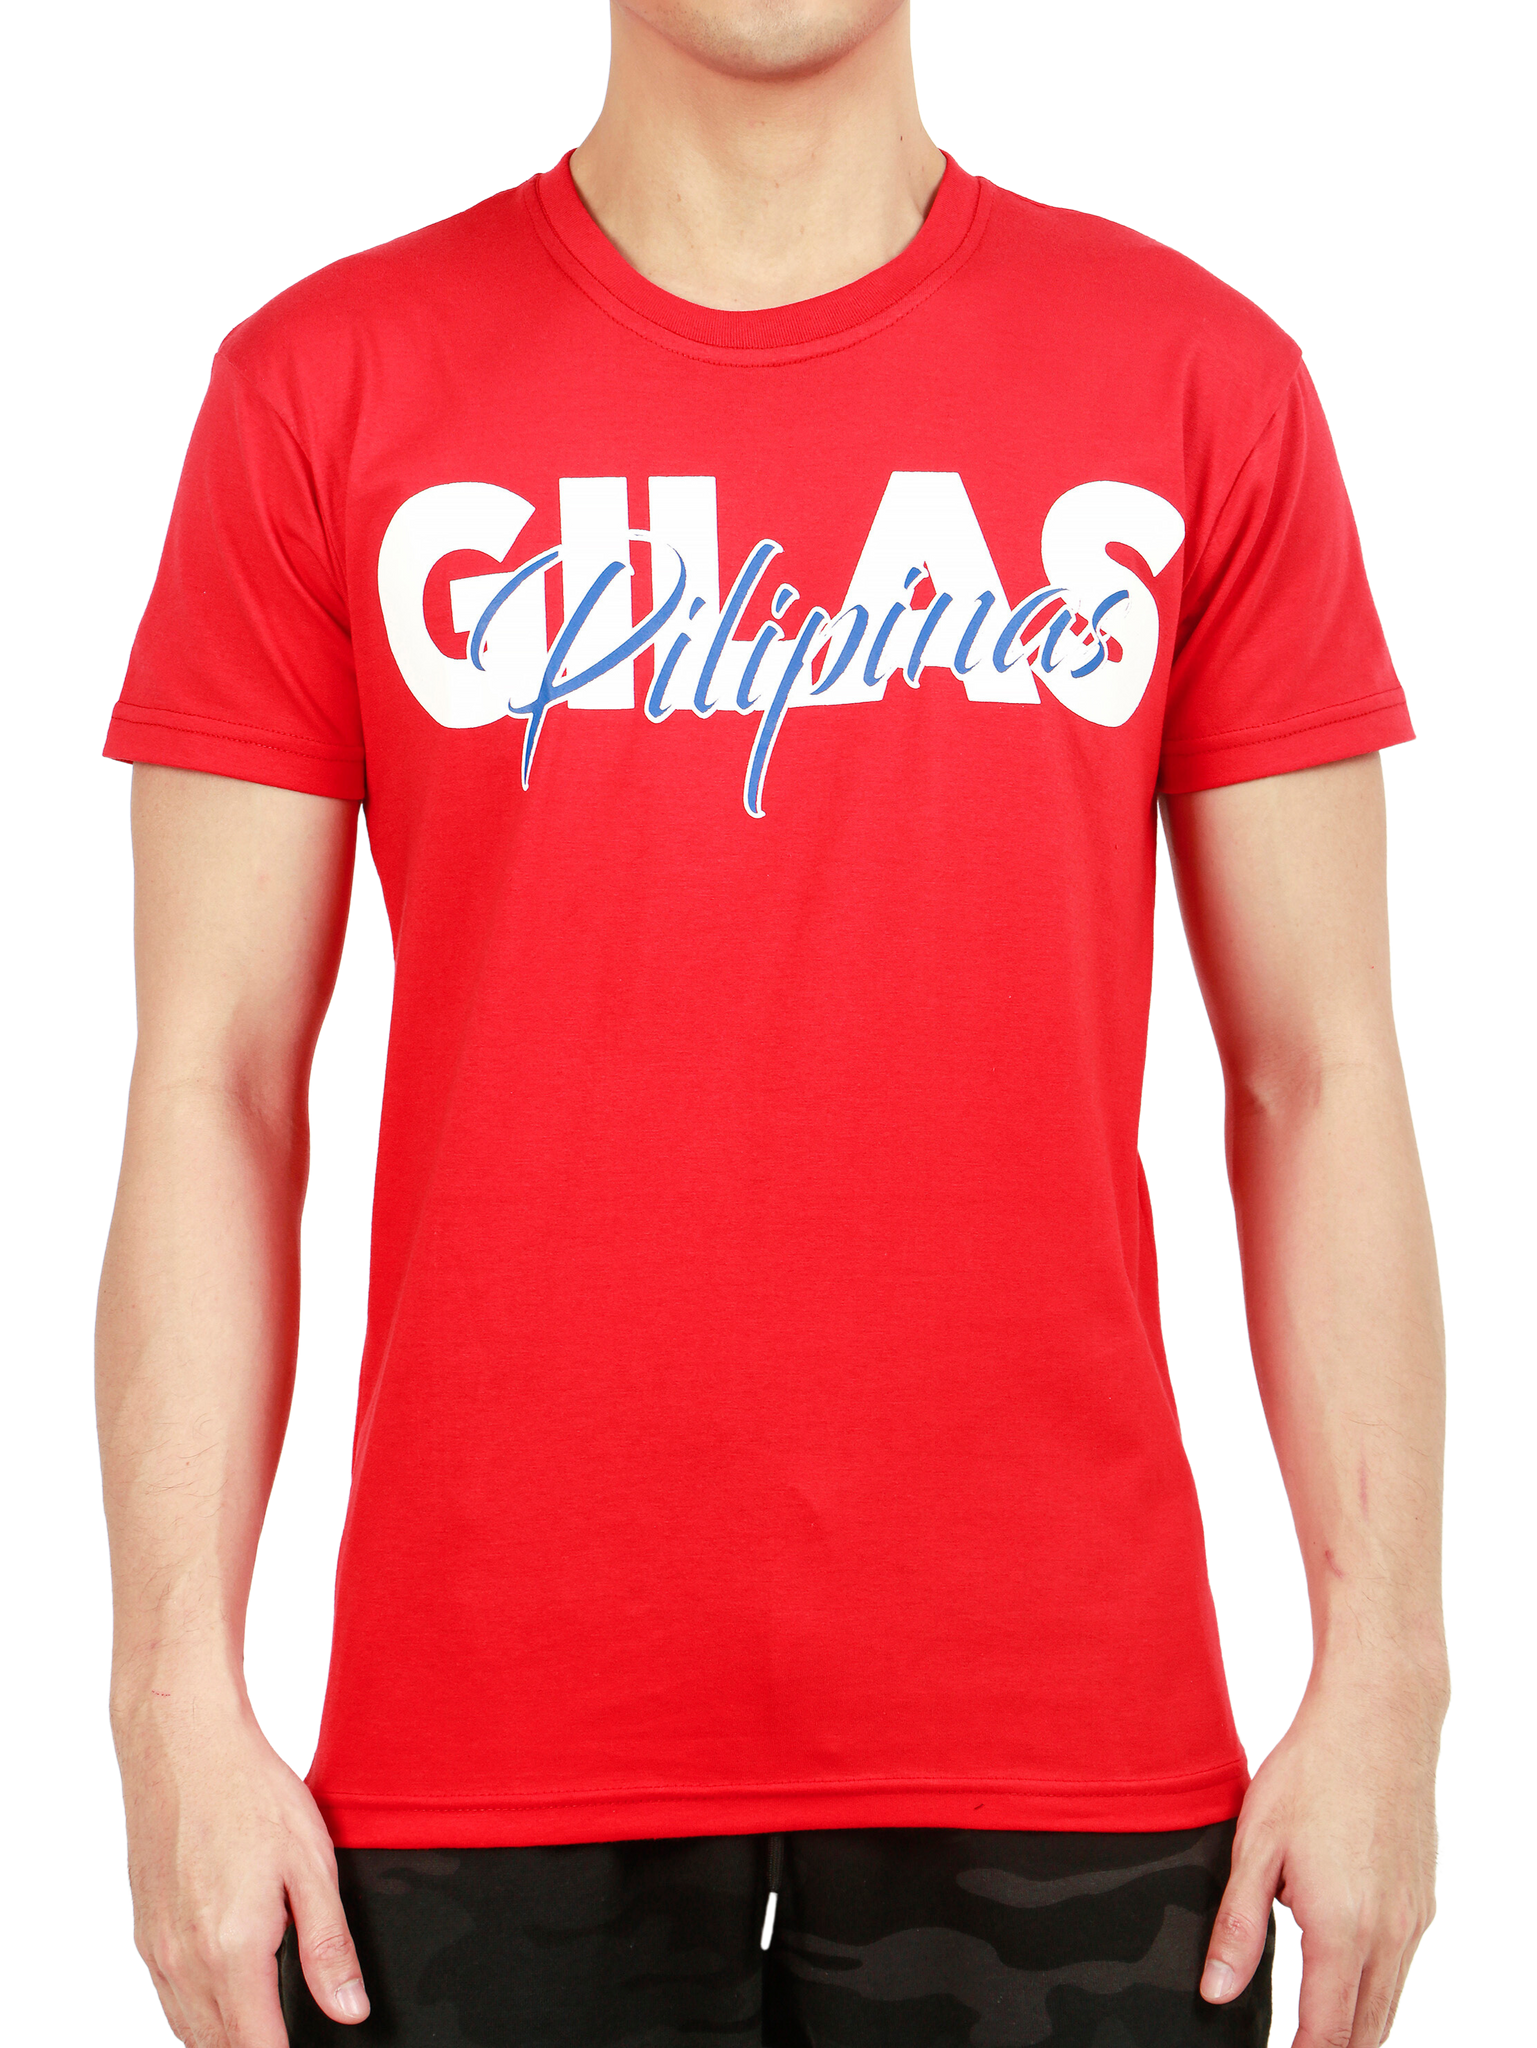 GILAS PILIPINAS in Red for Mens